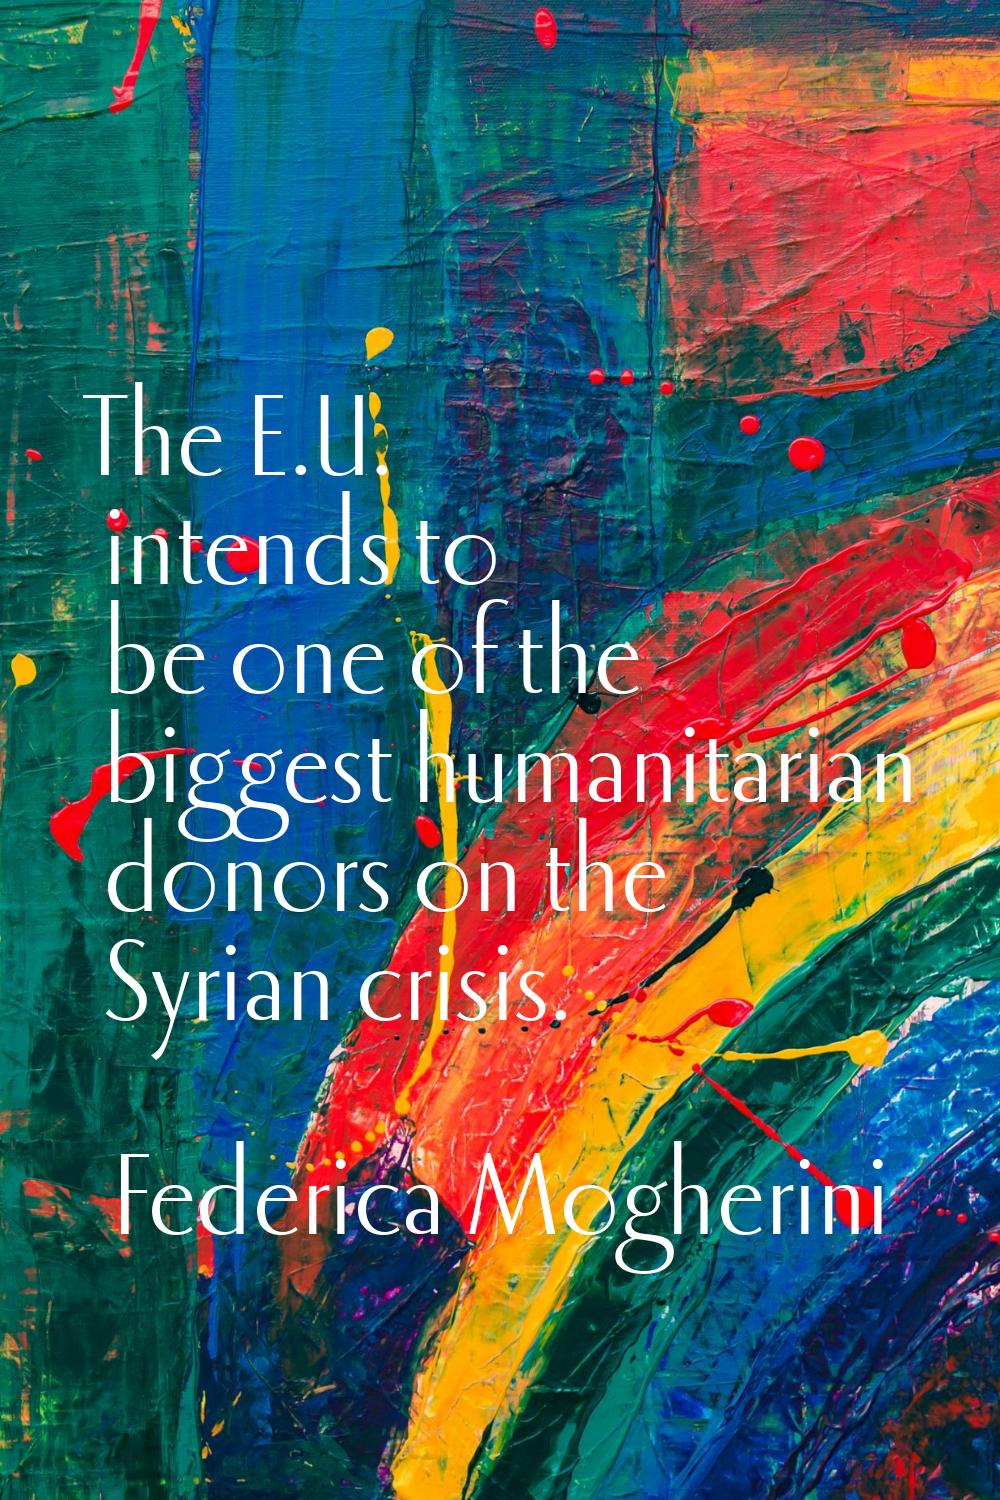 The E.U. intends to be one of the biggest humanitarian donors on the Syrian crisis.